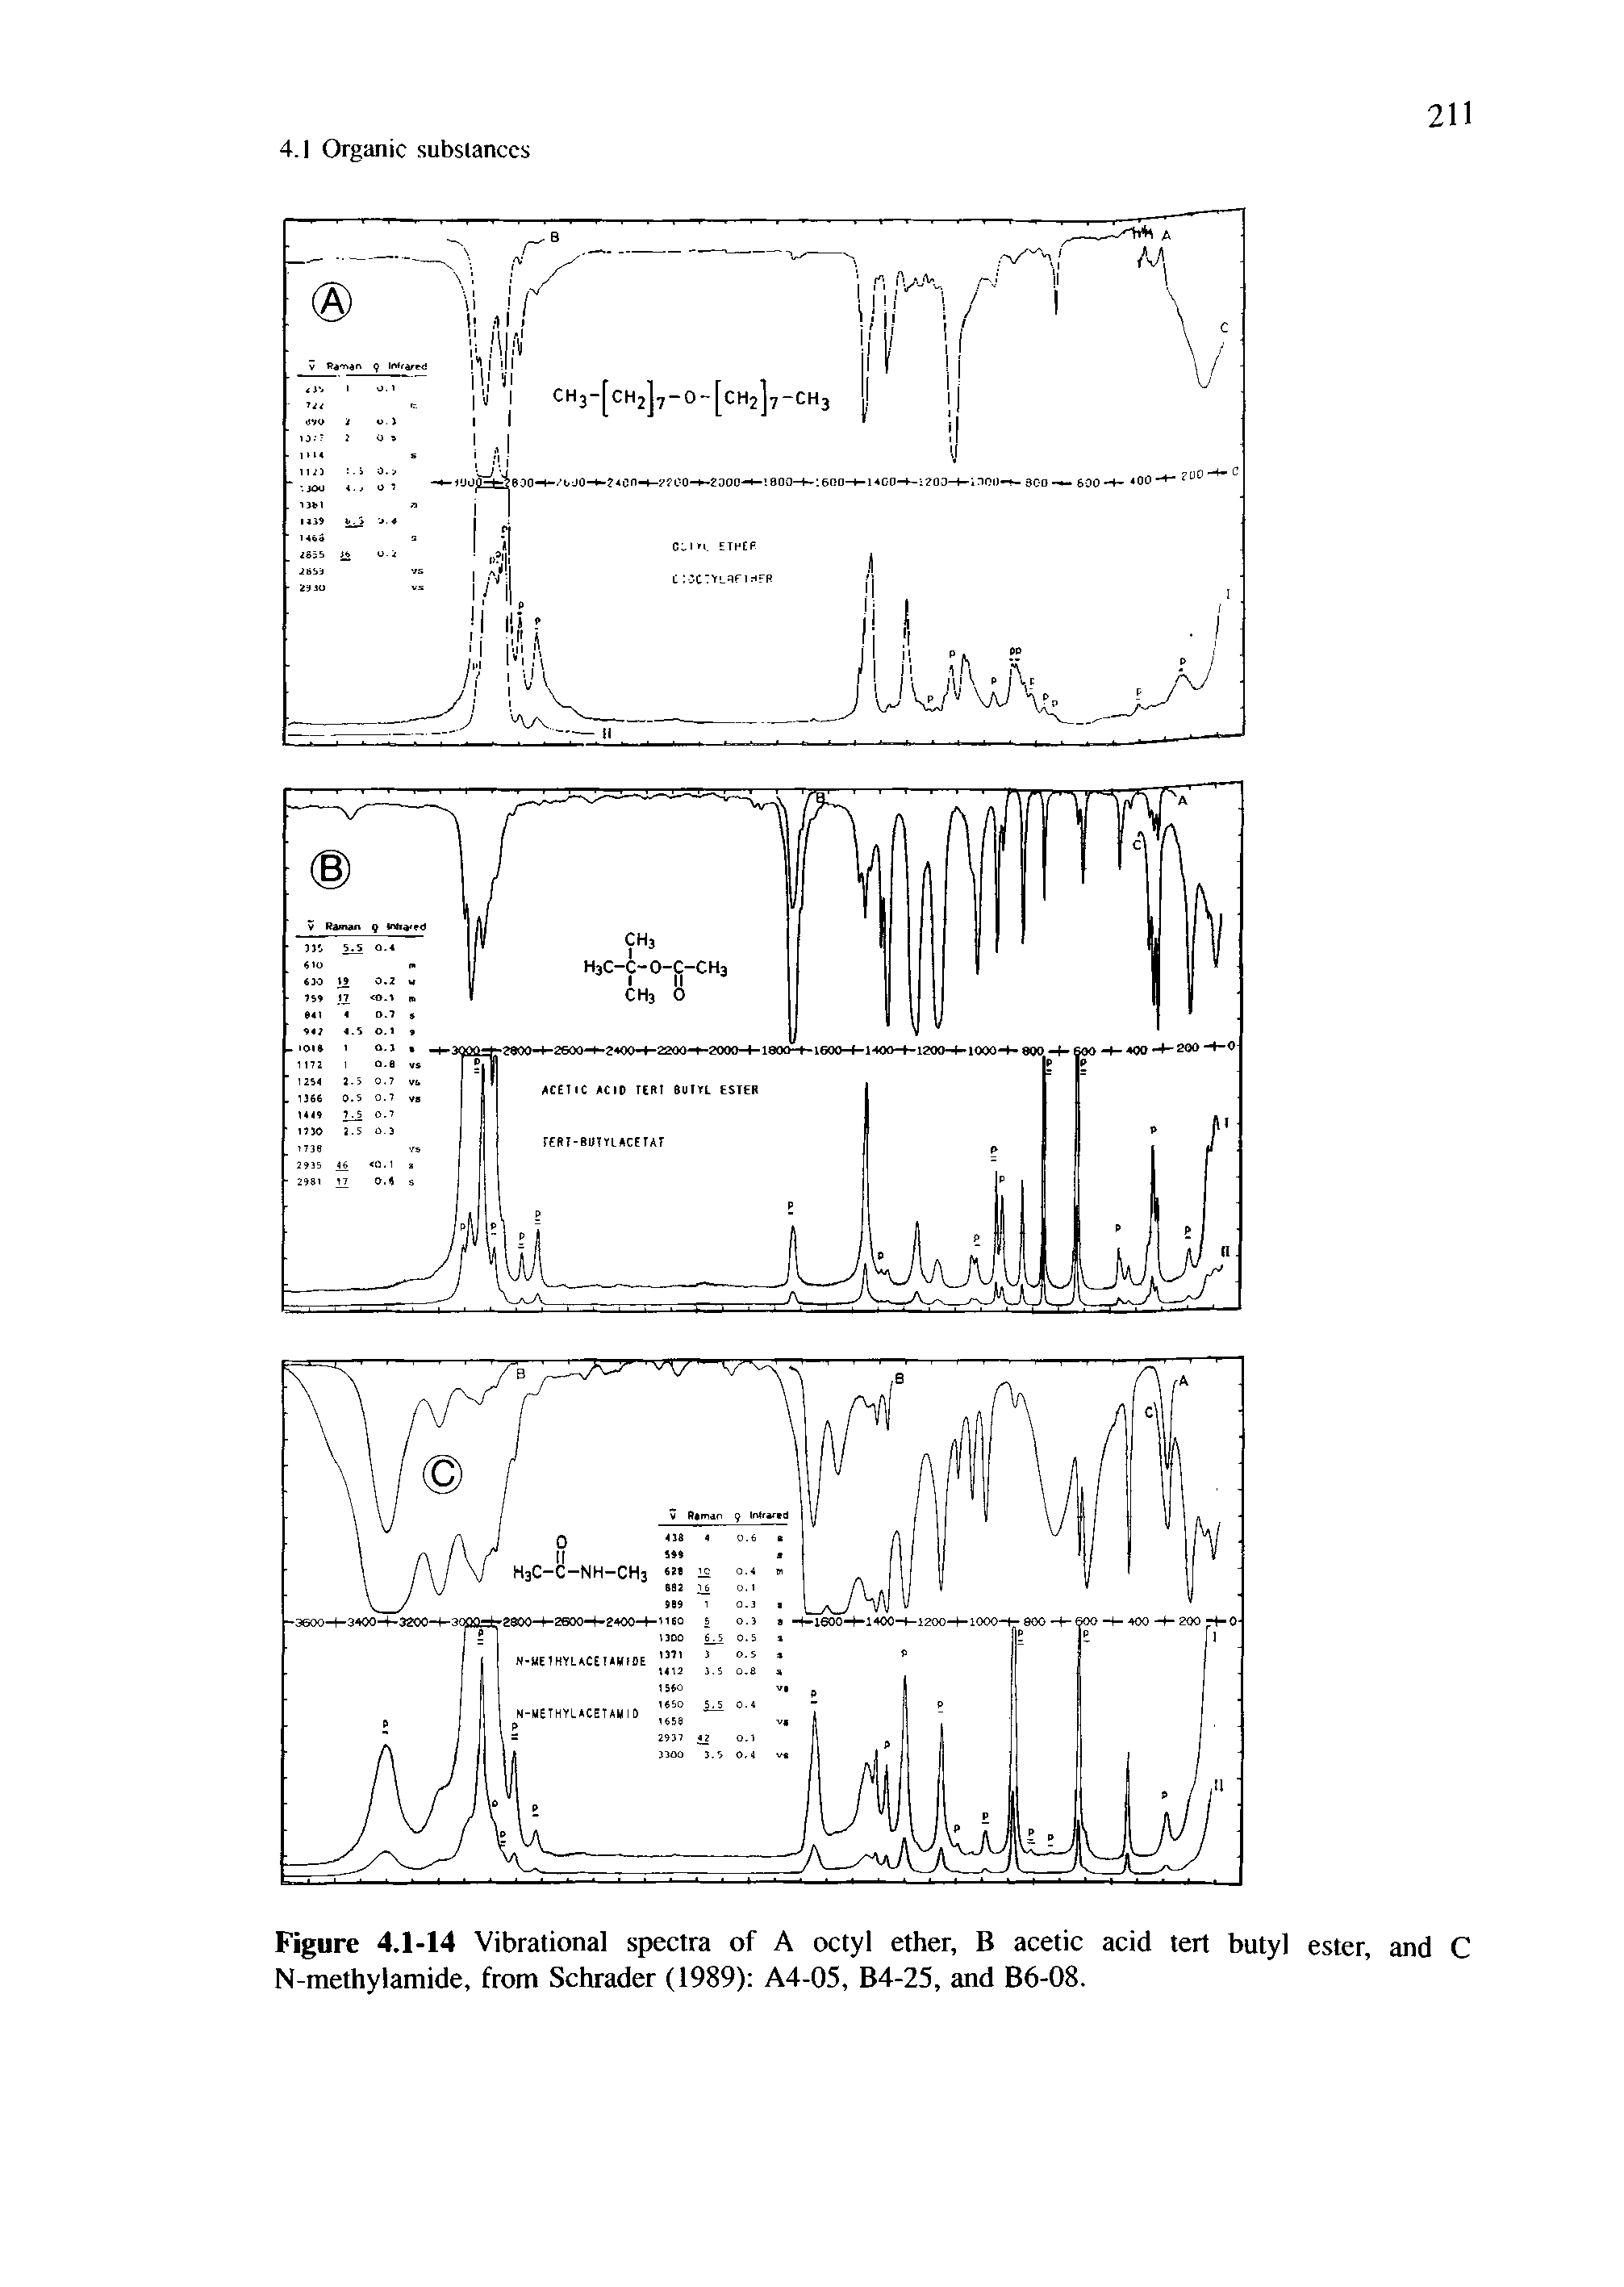 Figure 4.1-14 Vibrational spectra of A octyl ether, B acetic acid tert butyl ester, and C N-methylamide, from Schrader (1989) A4-05, B4-25, and B6-08.